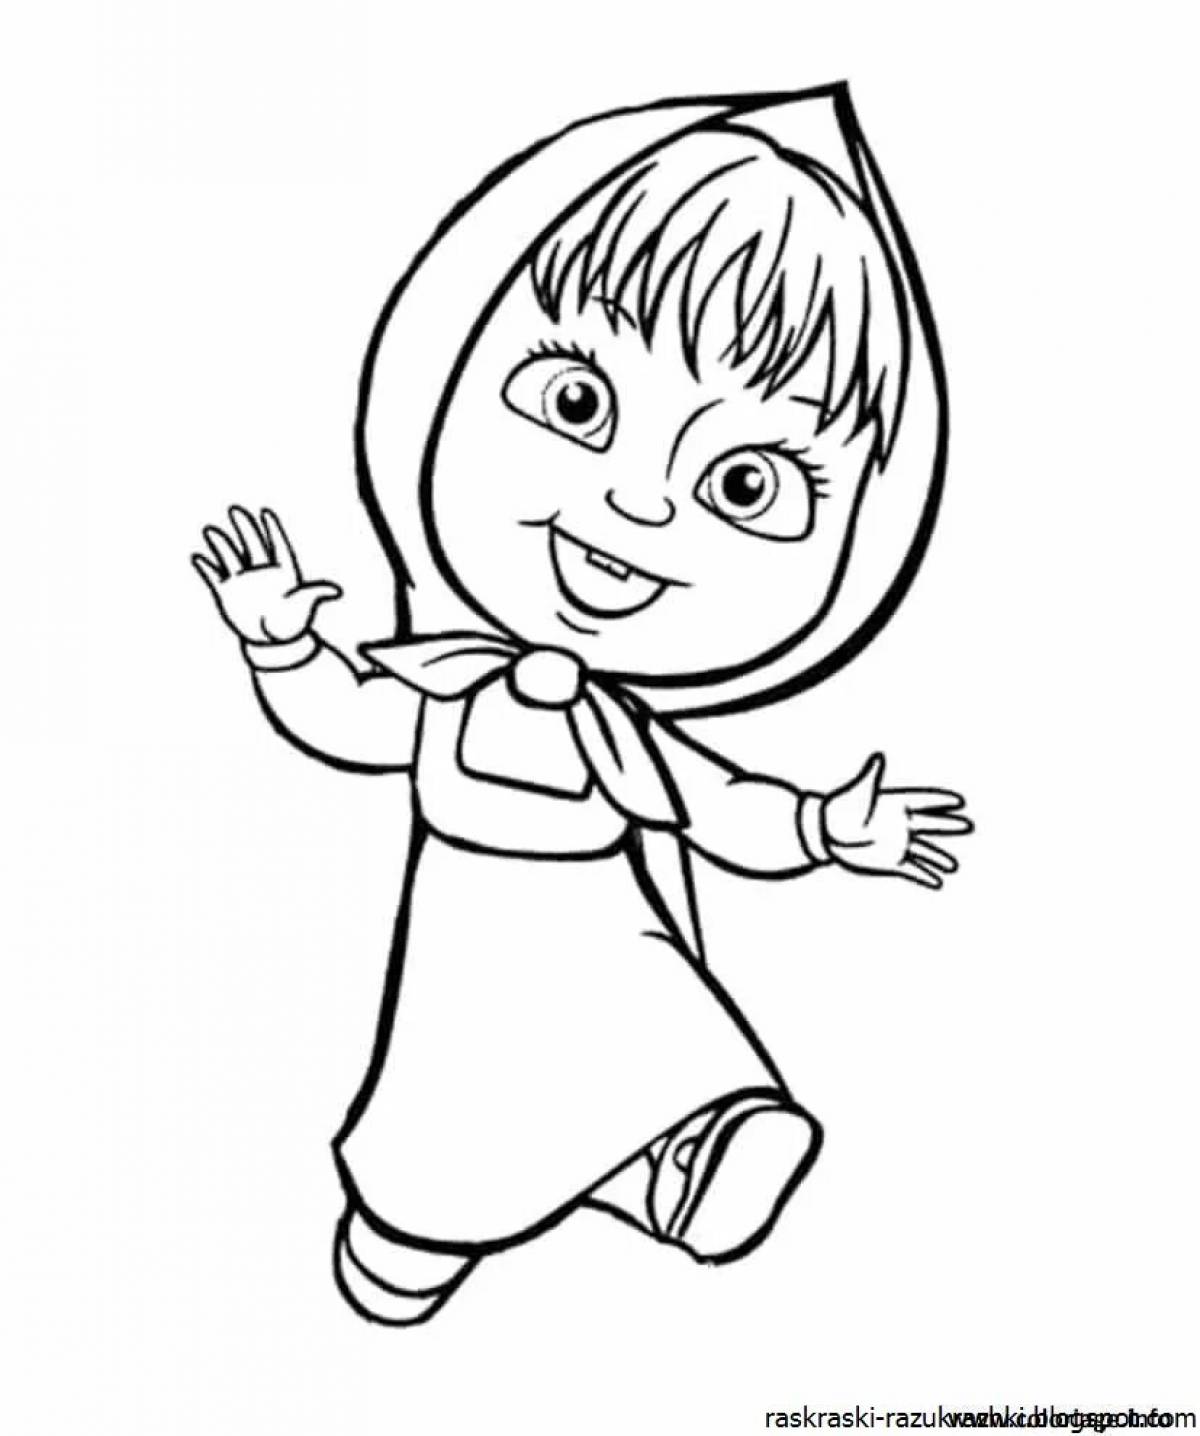 Flower-obsessed masha and the bear coloring book